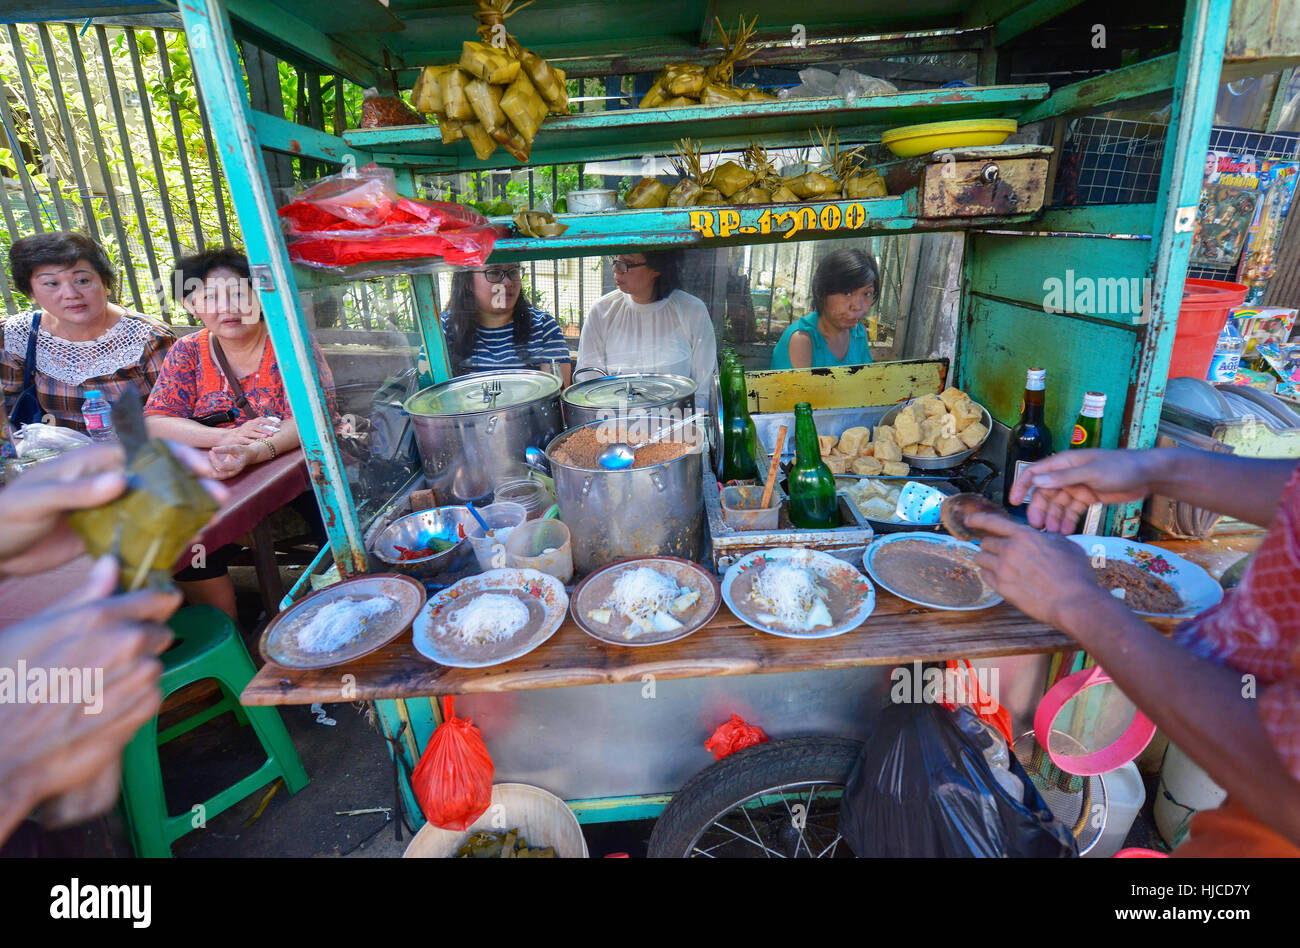 Food Stall Indonesia Stock Photos  Food Stall Indonesia Stock Images  Alamy